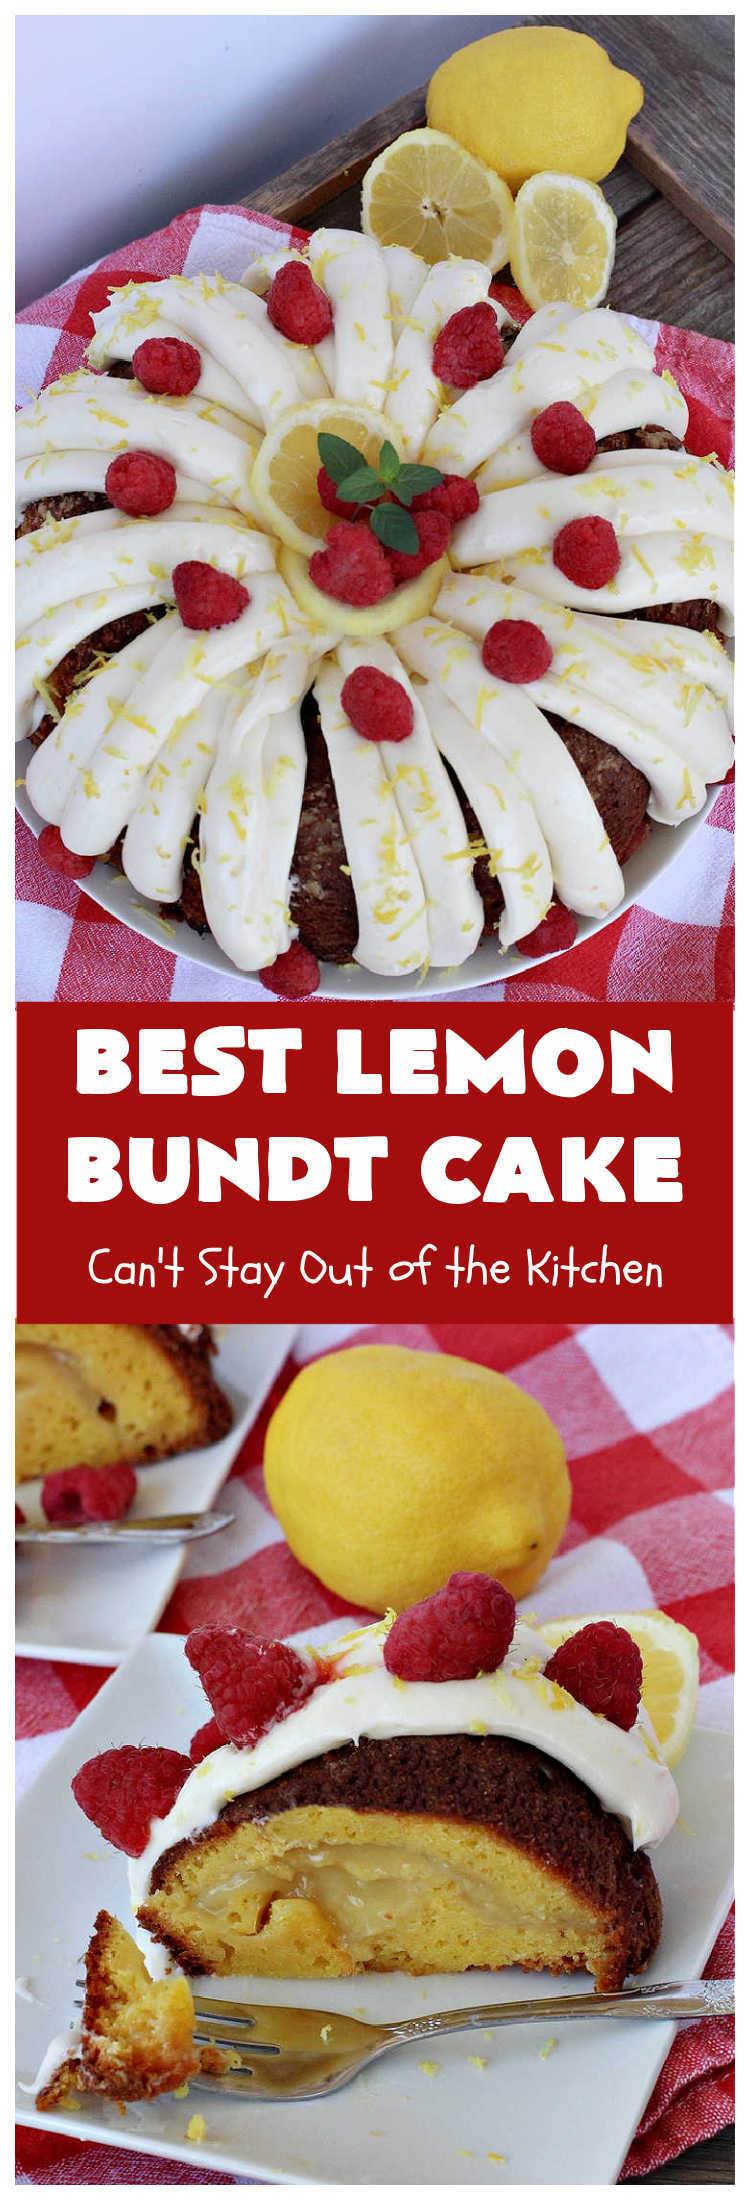 Best Lemon Bundt Cake | Can't Stay Out of the Kitchen